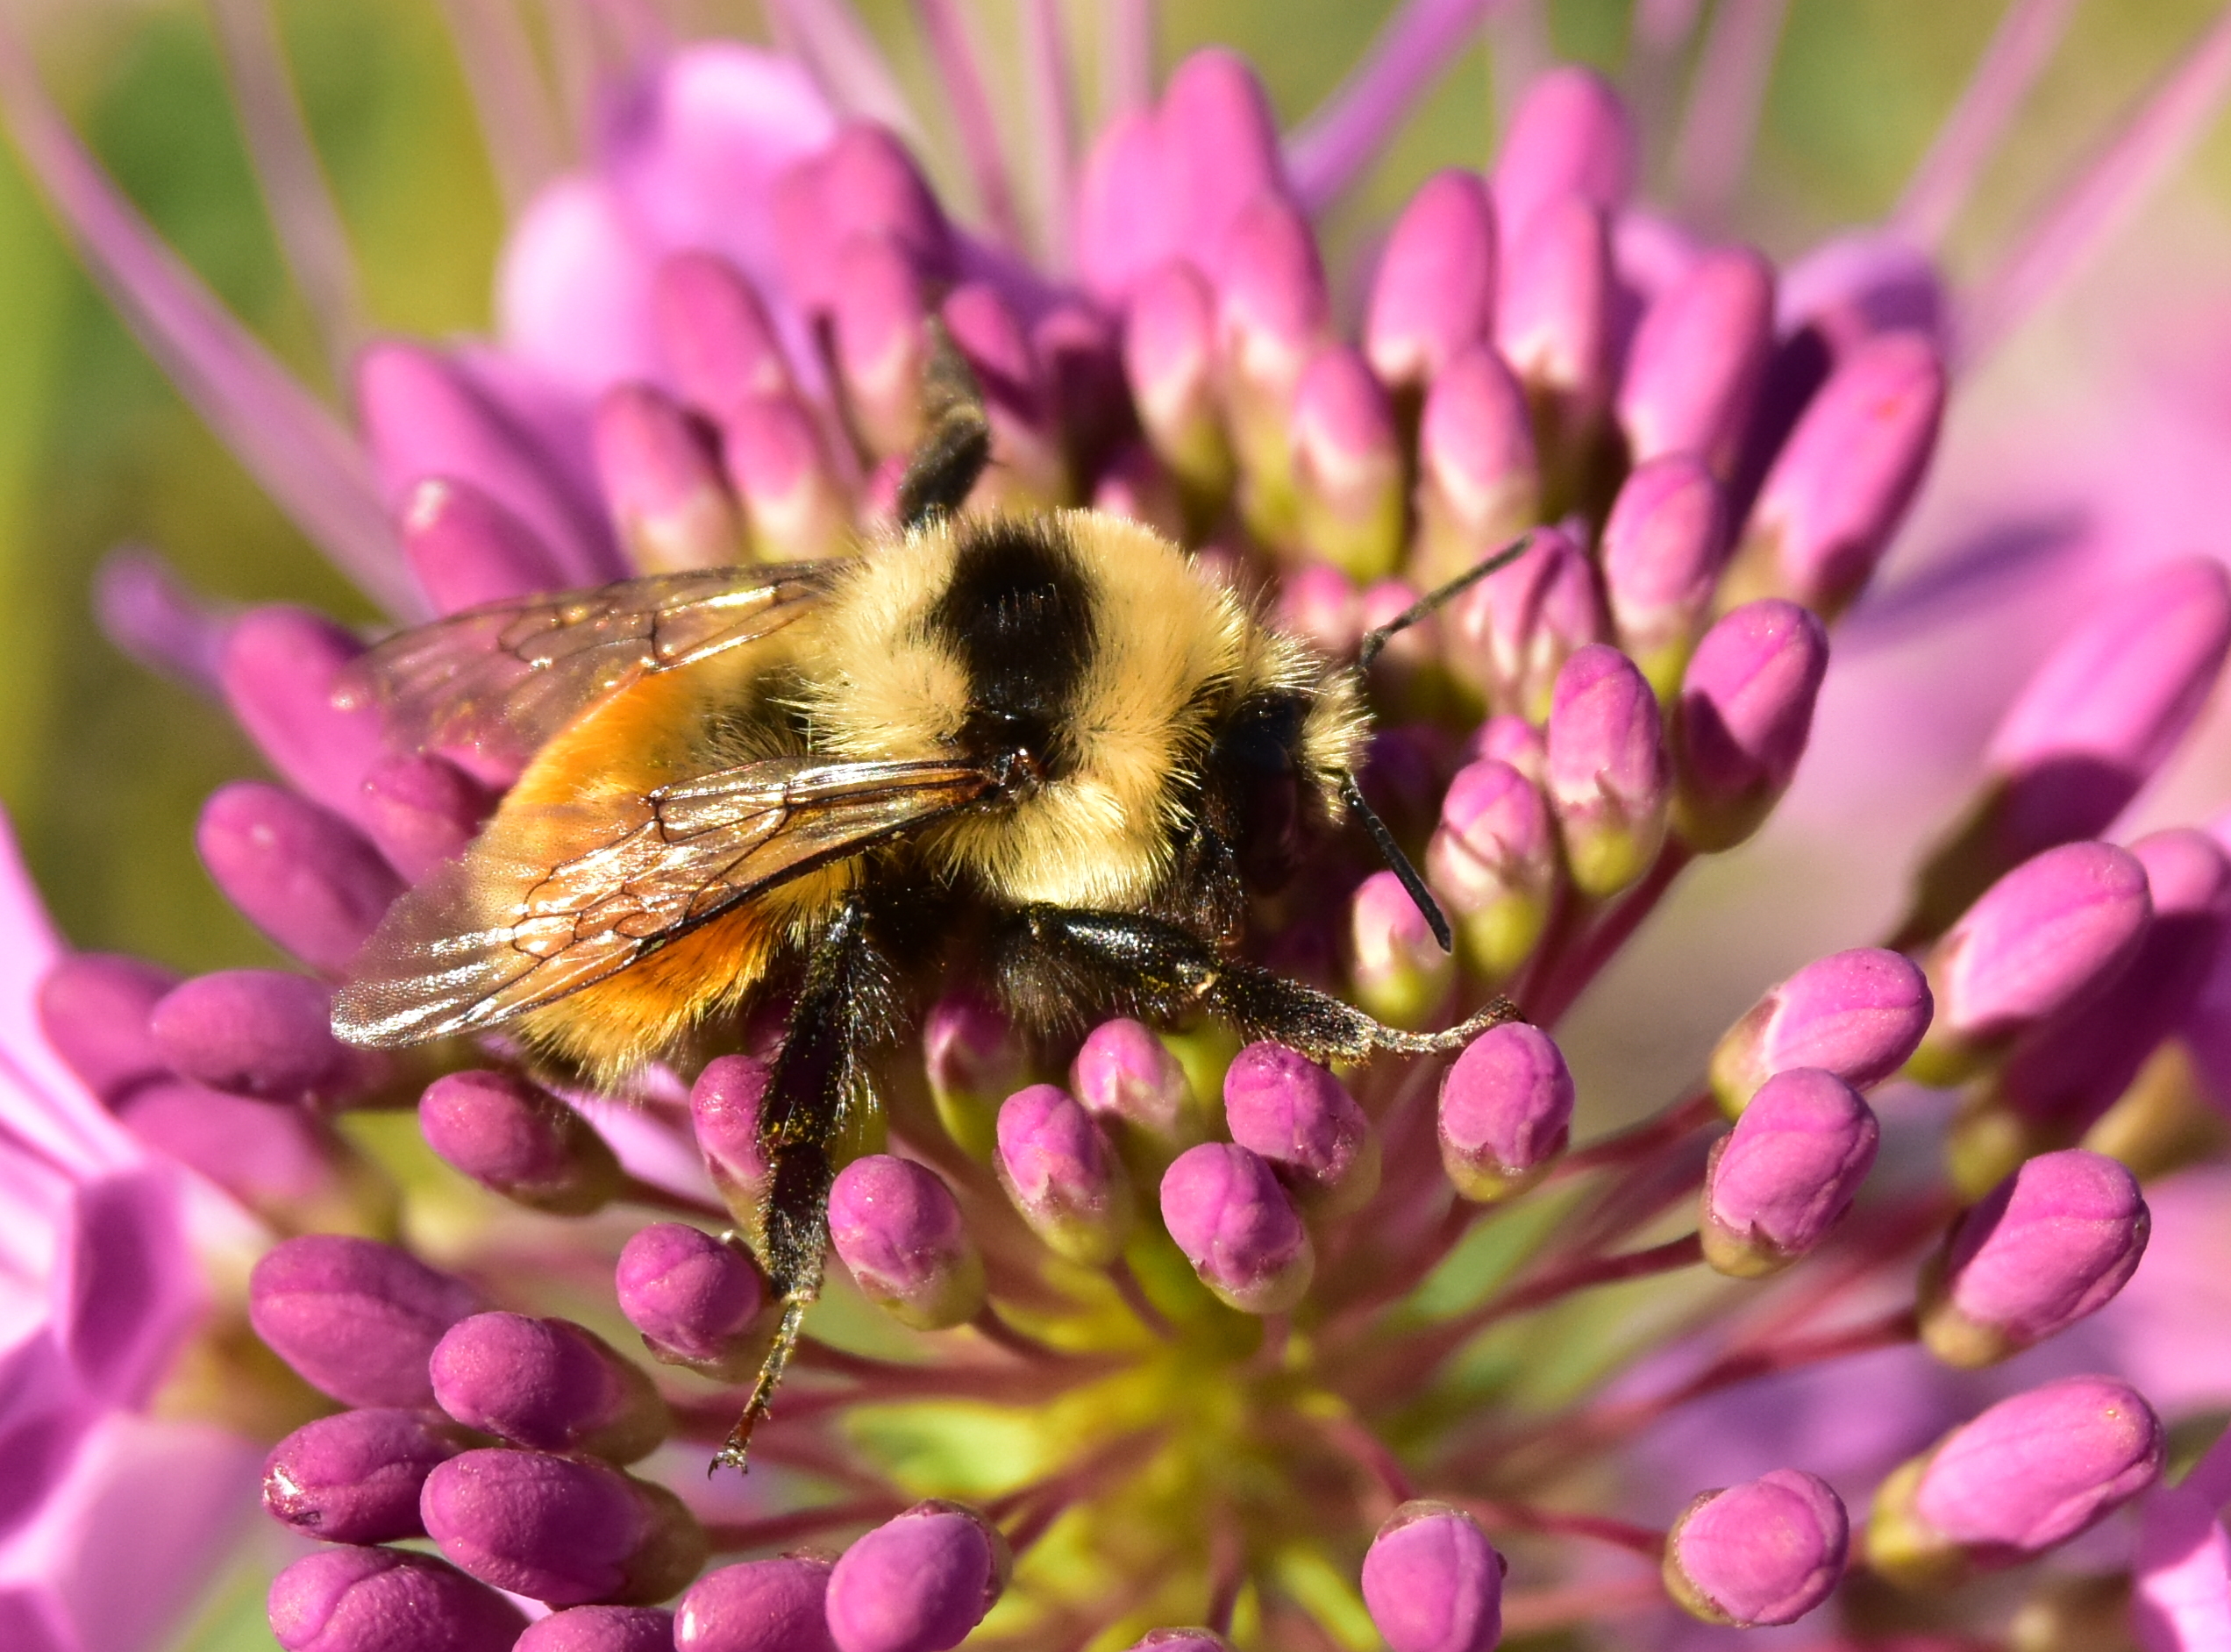 A bumblebee sitting within a pink flower